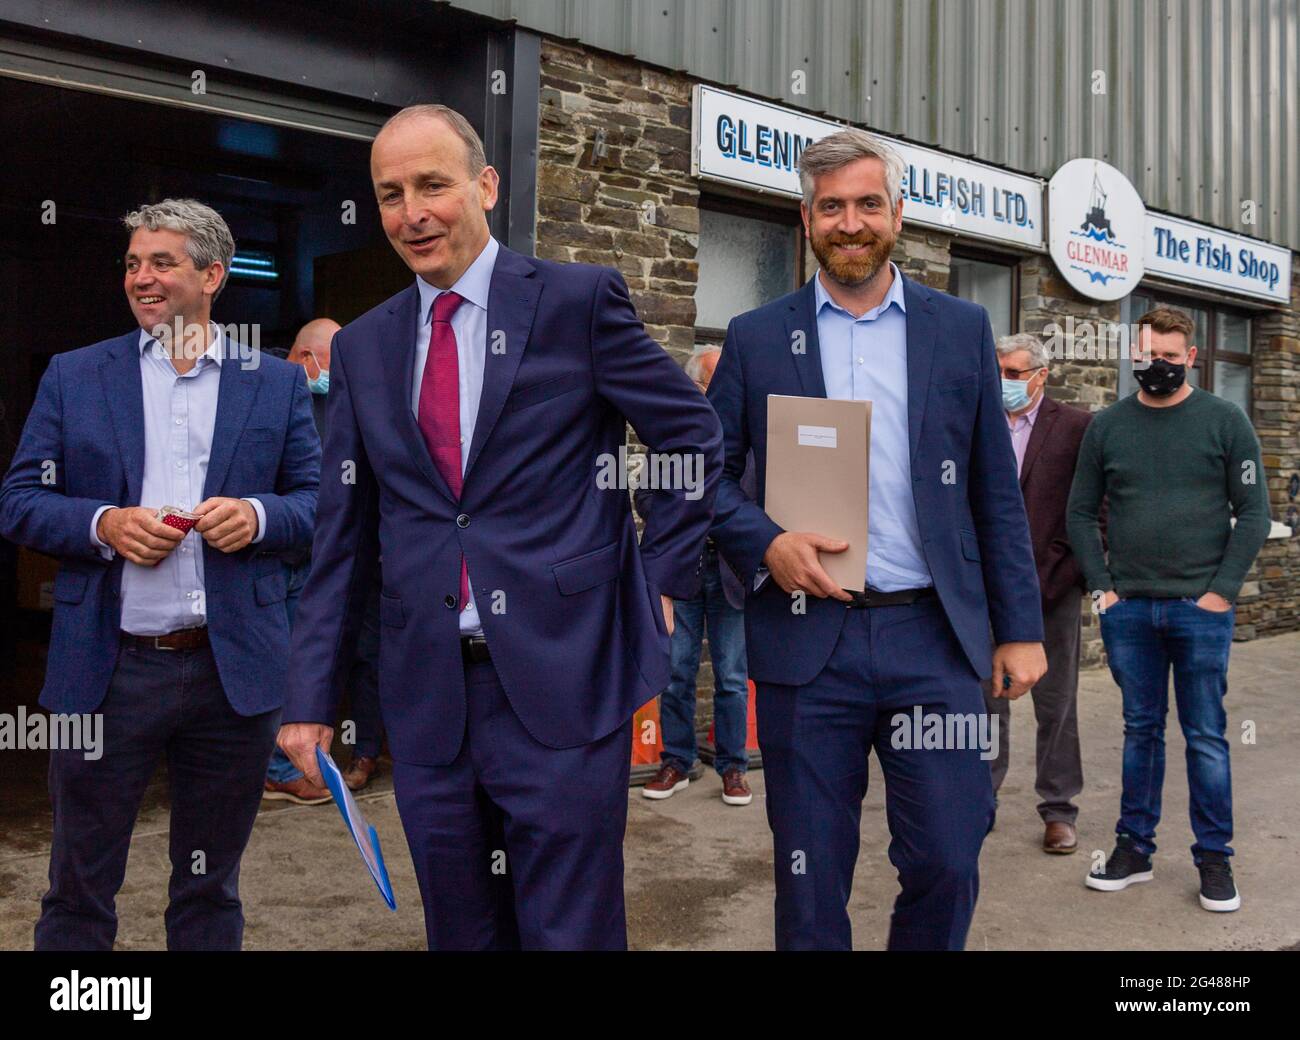 Union Hall, West Cork, Ireland, Saturday 19th June 2021. The Taoiseach Micheál Martin paid a surprise visit to Keelbeg Pier Union Hall this evening too meet the fishermen of the Union Hall fishing fleet. He took the opportunity to listen to the fishermens ongoing issues with quota’s and weighing in catches on the quayside. He also took the chance to meet the wives and children.  Credit aphperspective/ Alamy Live News Stock Photo